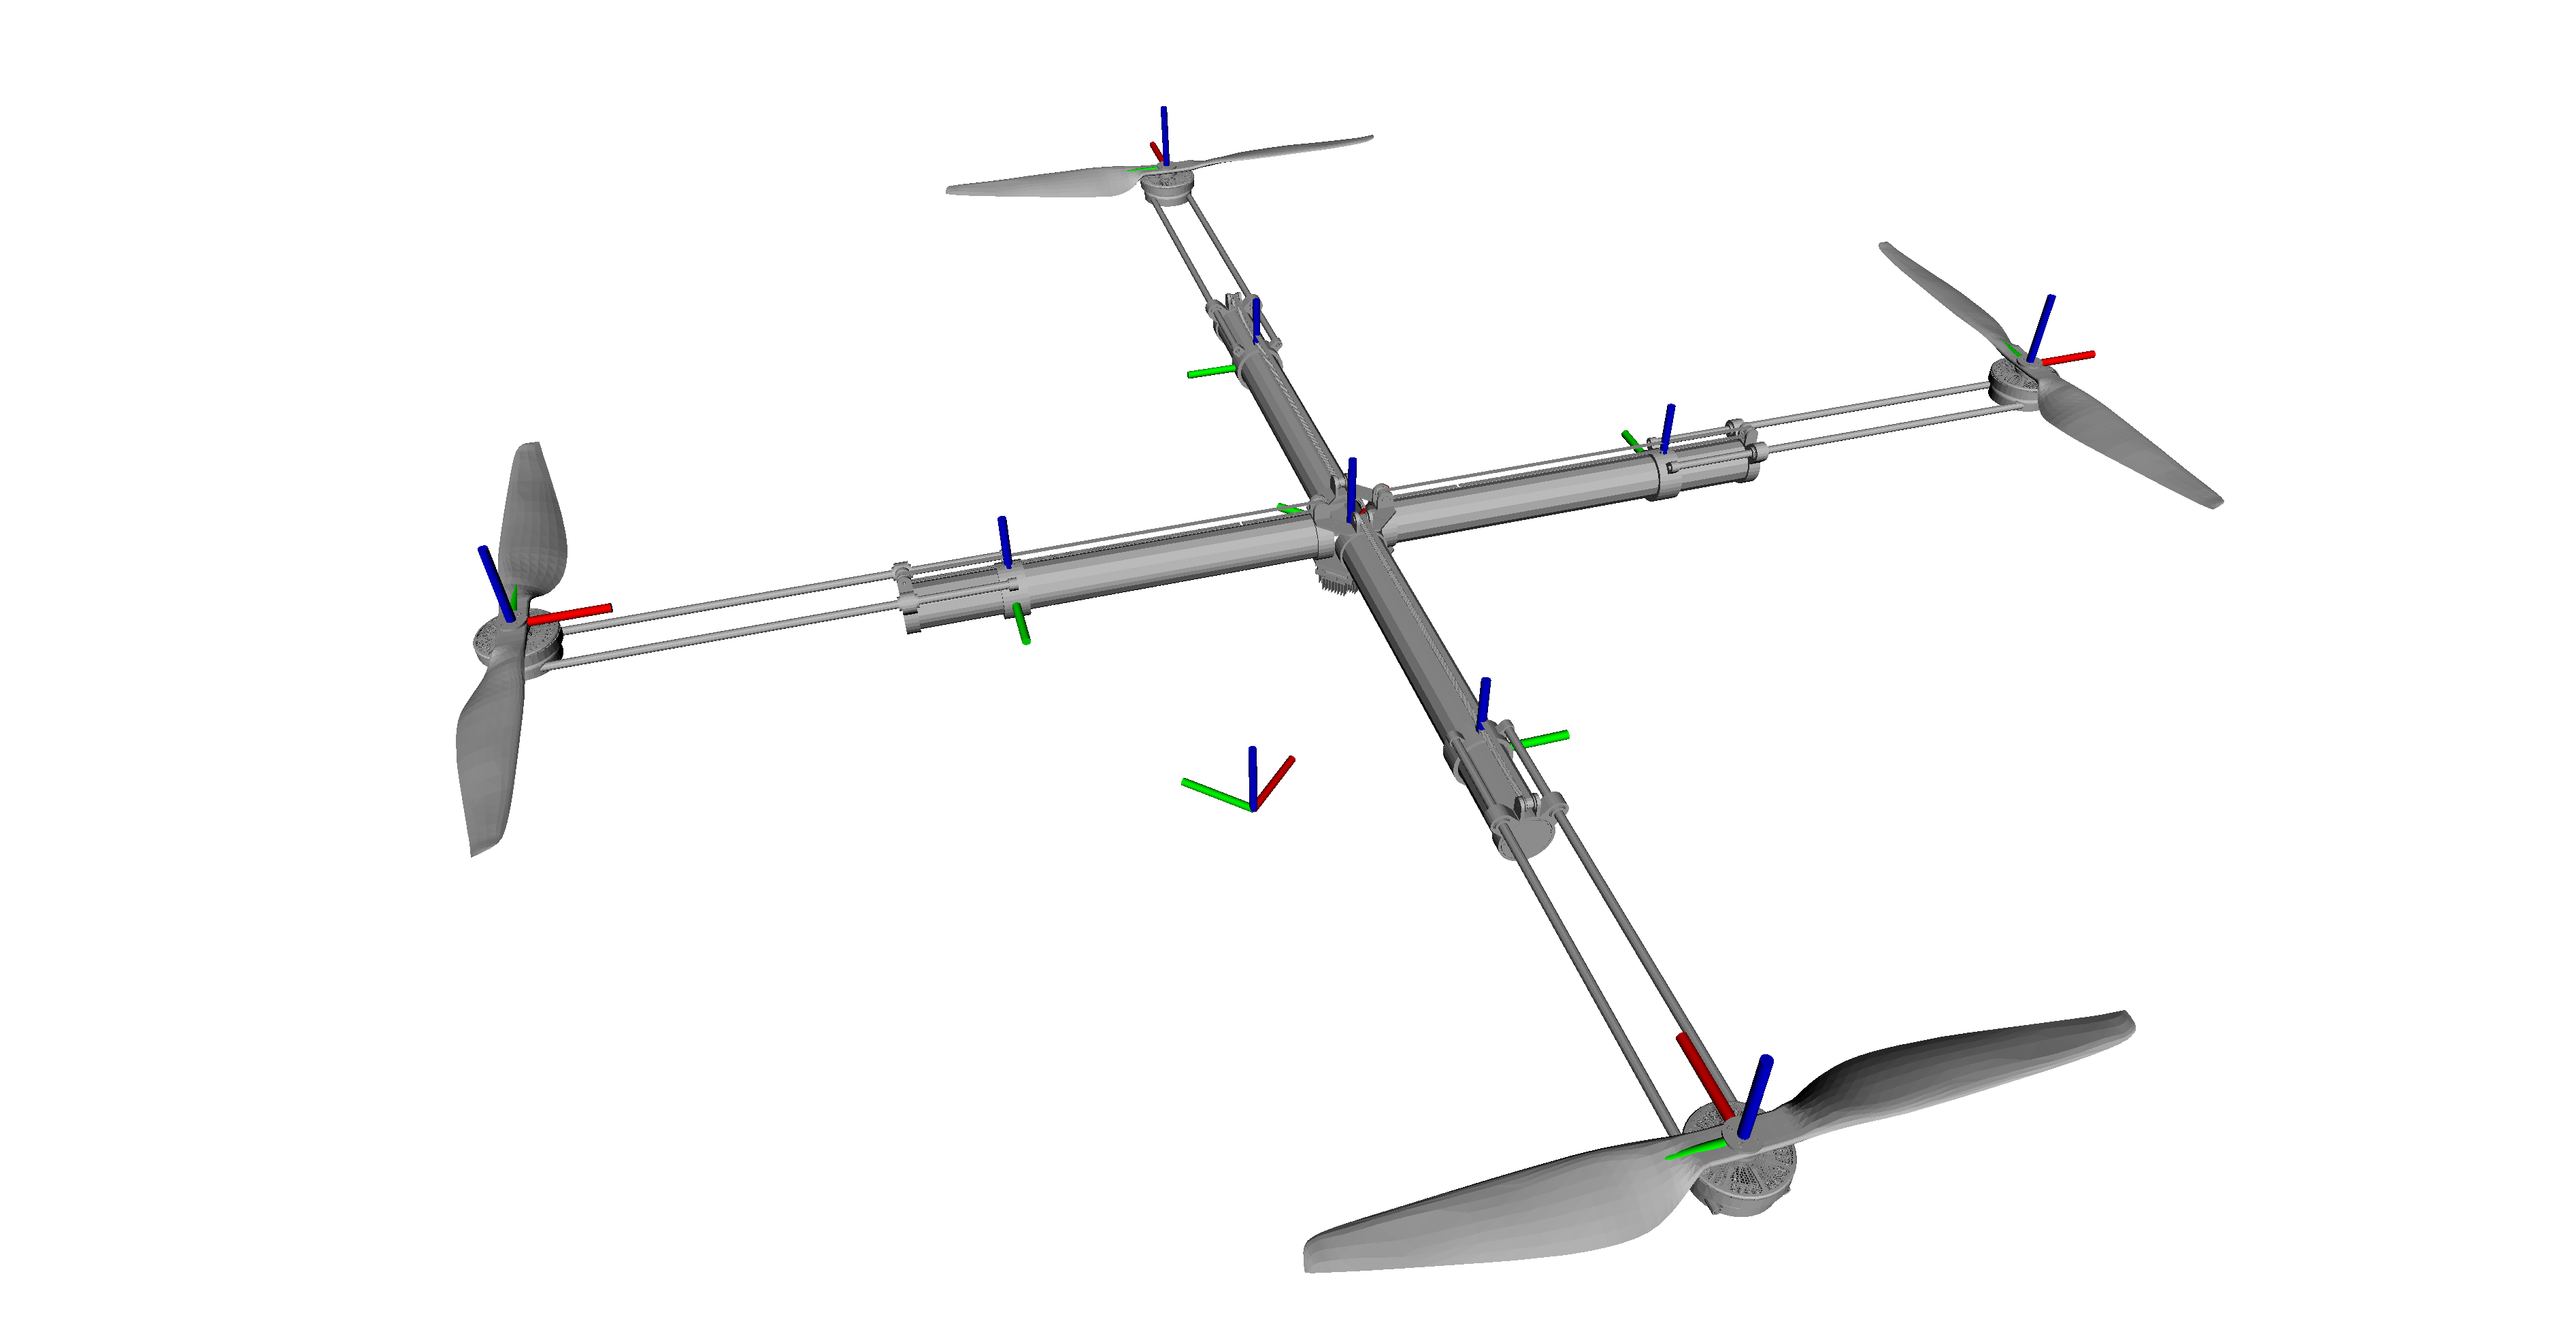 Over-the-shoulder view of the telescoping extension arm (TEA)-equipped quadrotor